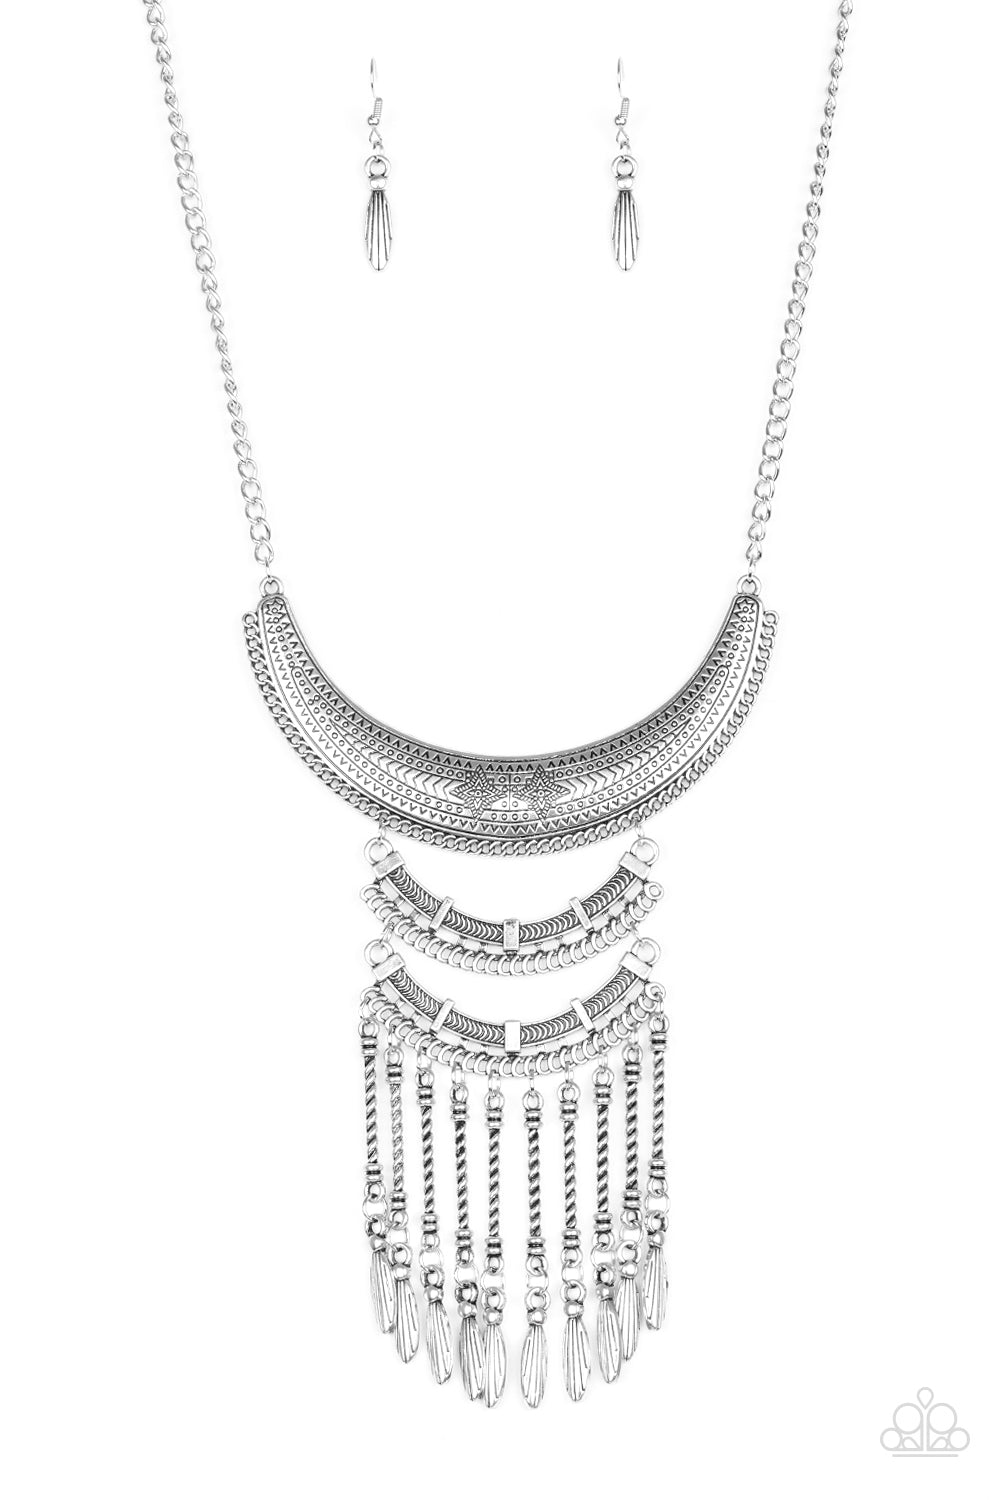 Paparazzi Accessories Eastern Empress - Silver Necklaces - Lady T Accessories